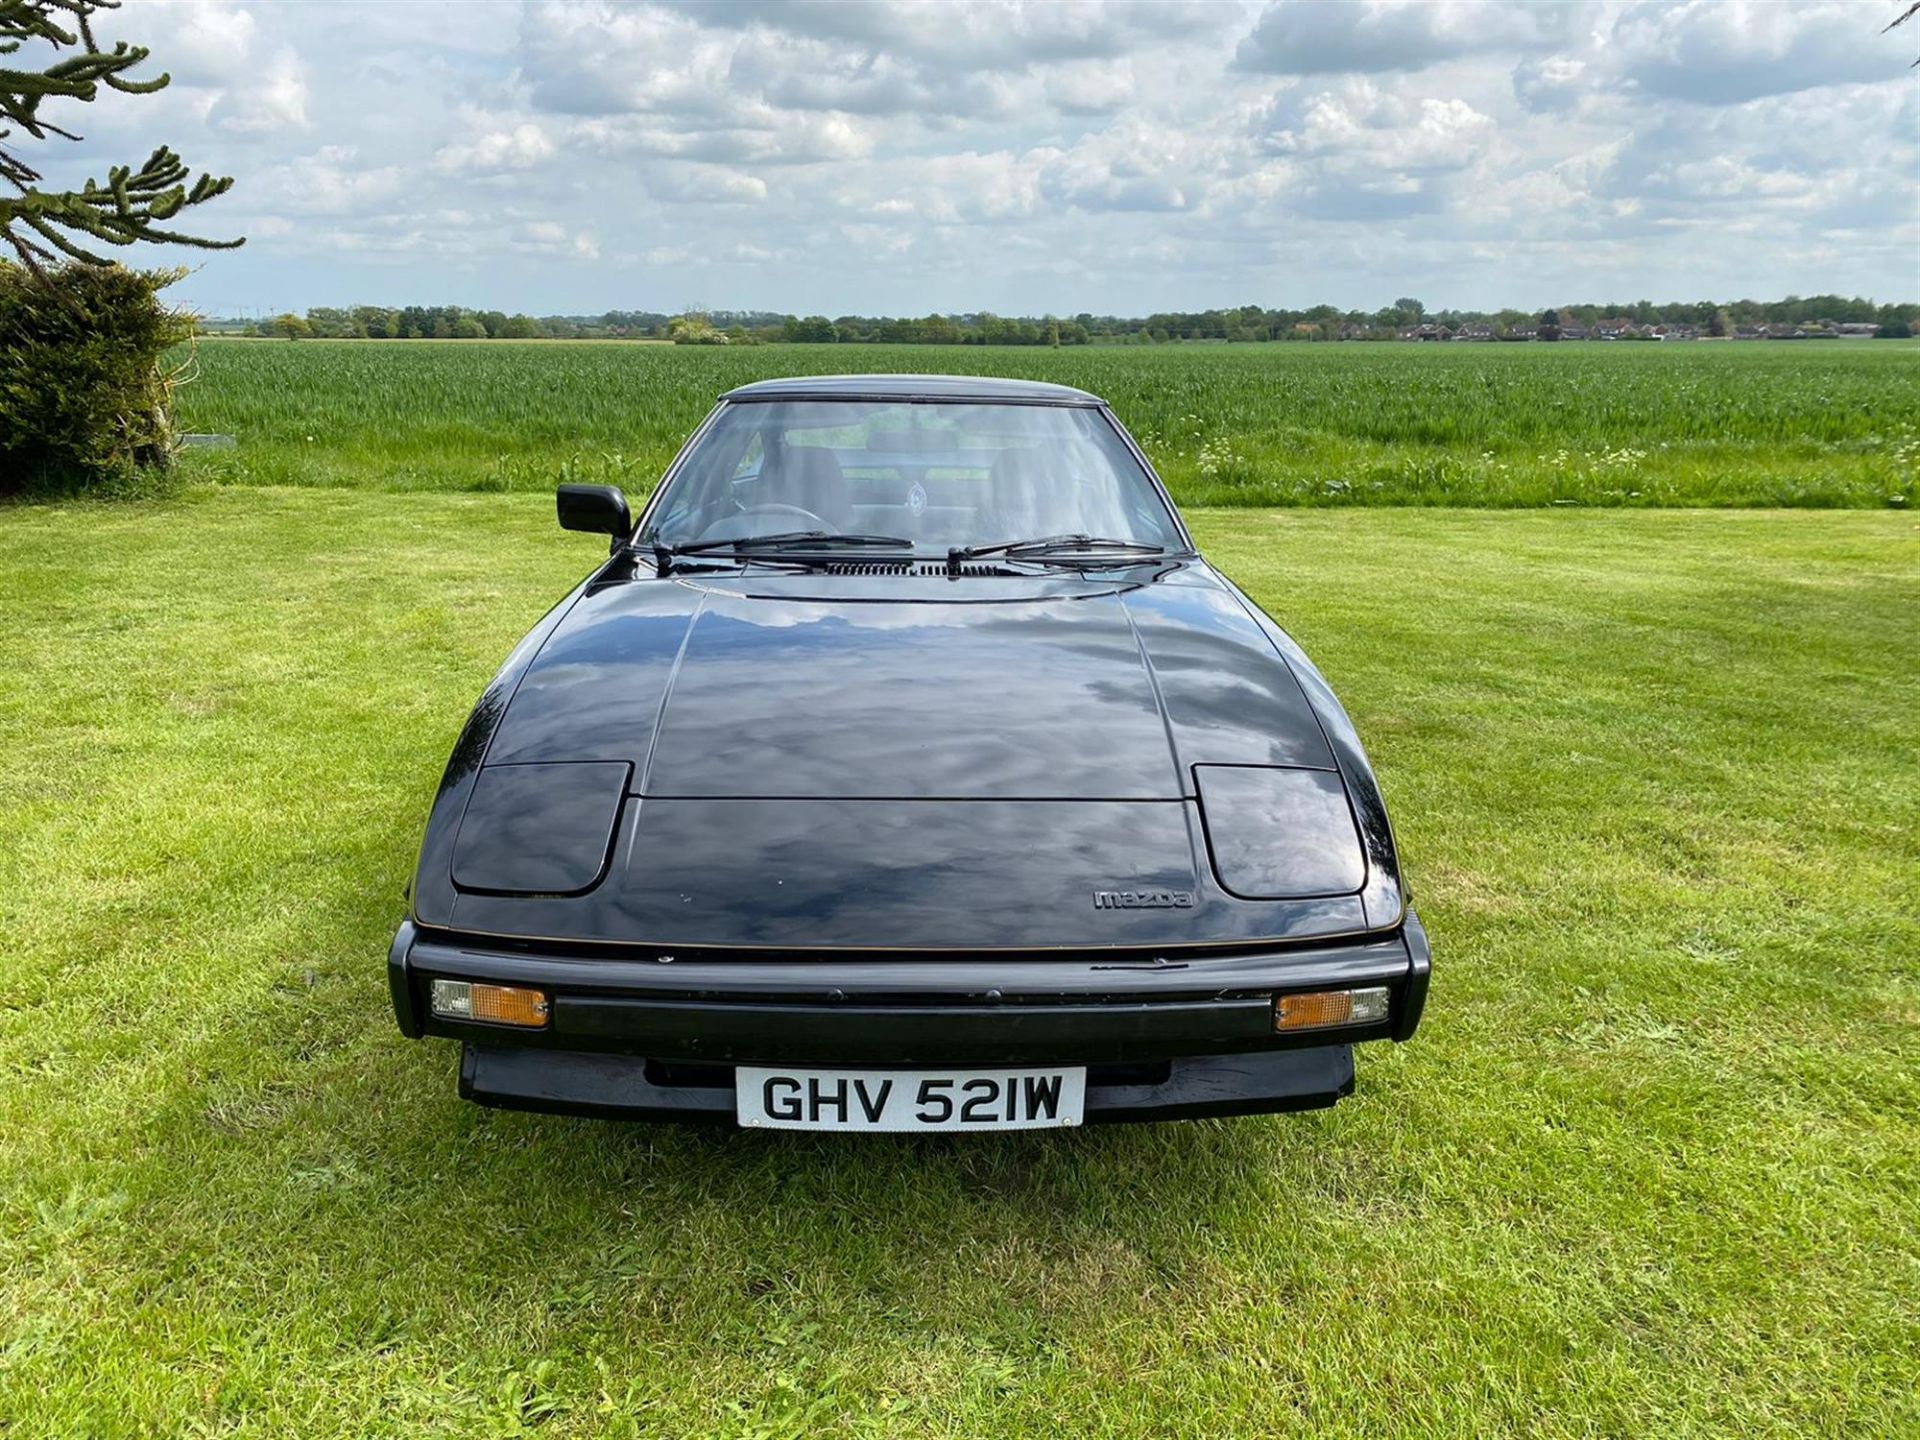 1980 Mazda RX-7 Series 1 (TWR) - Image 9 of 10